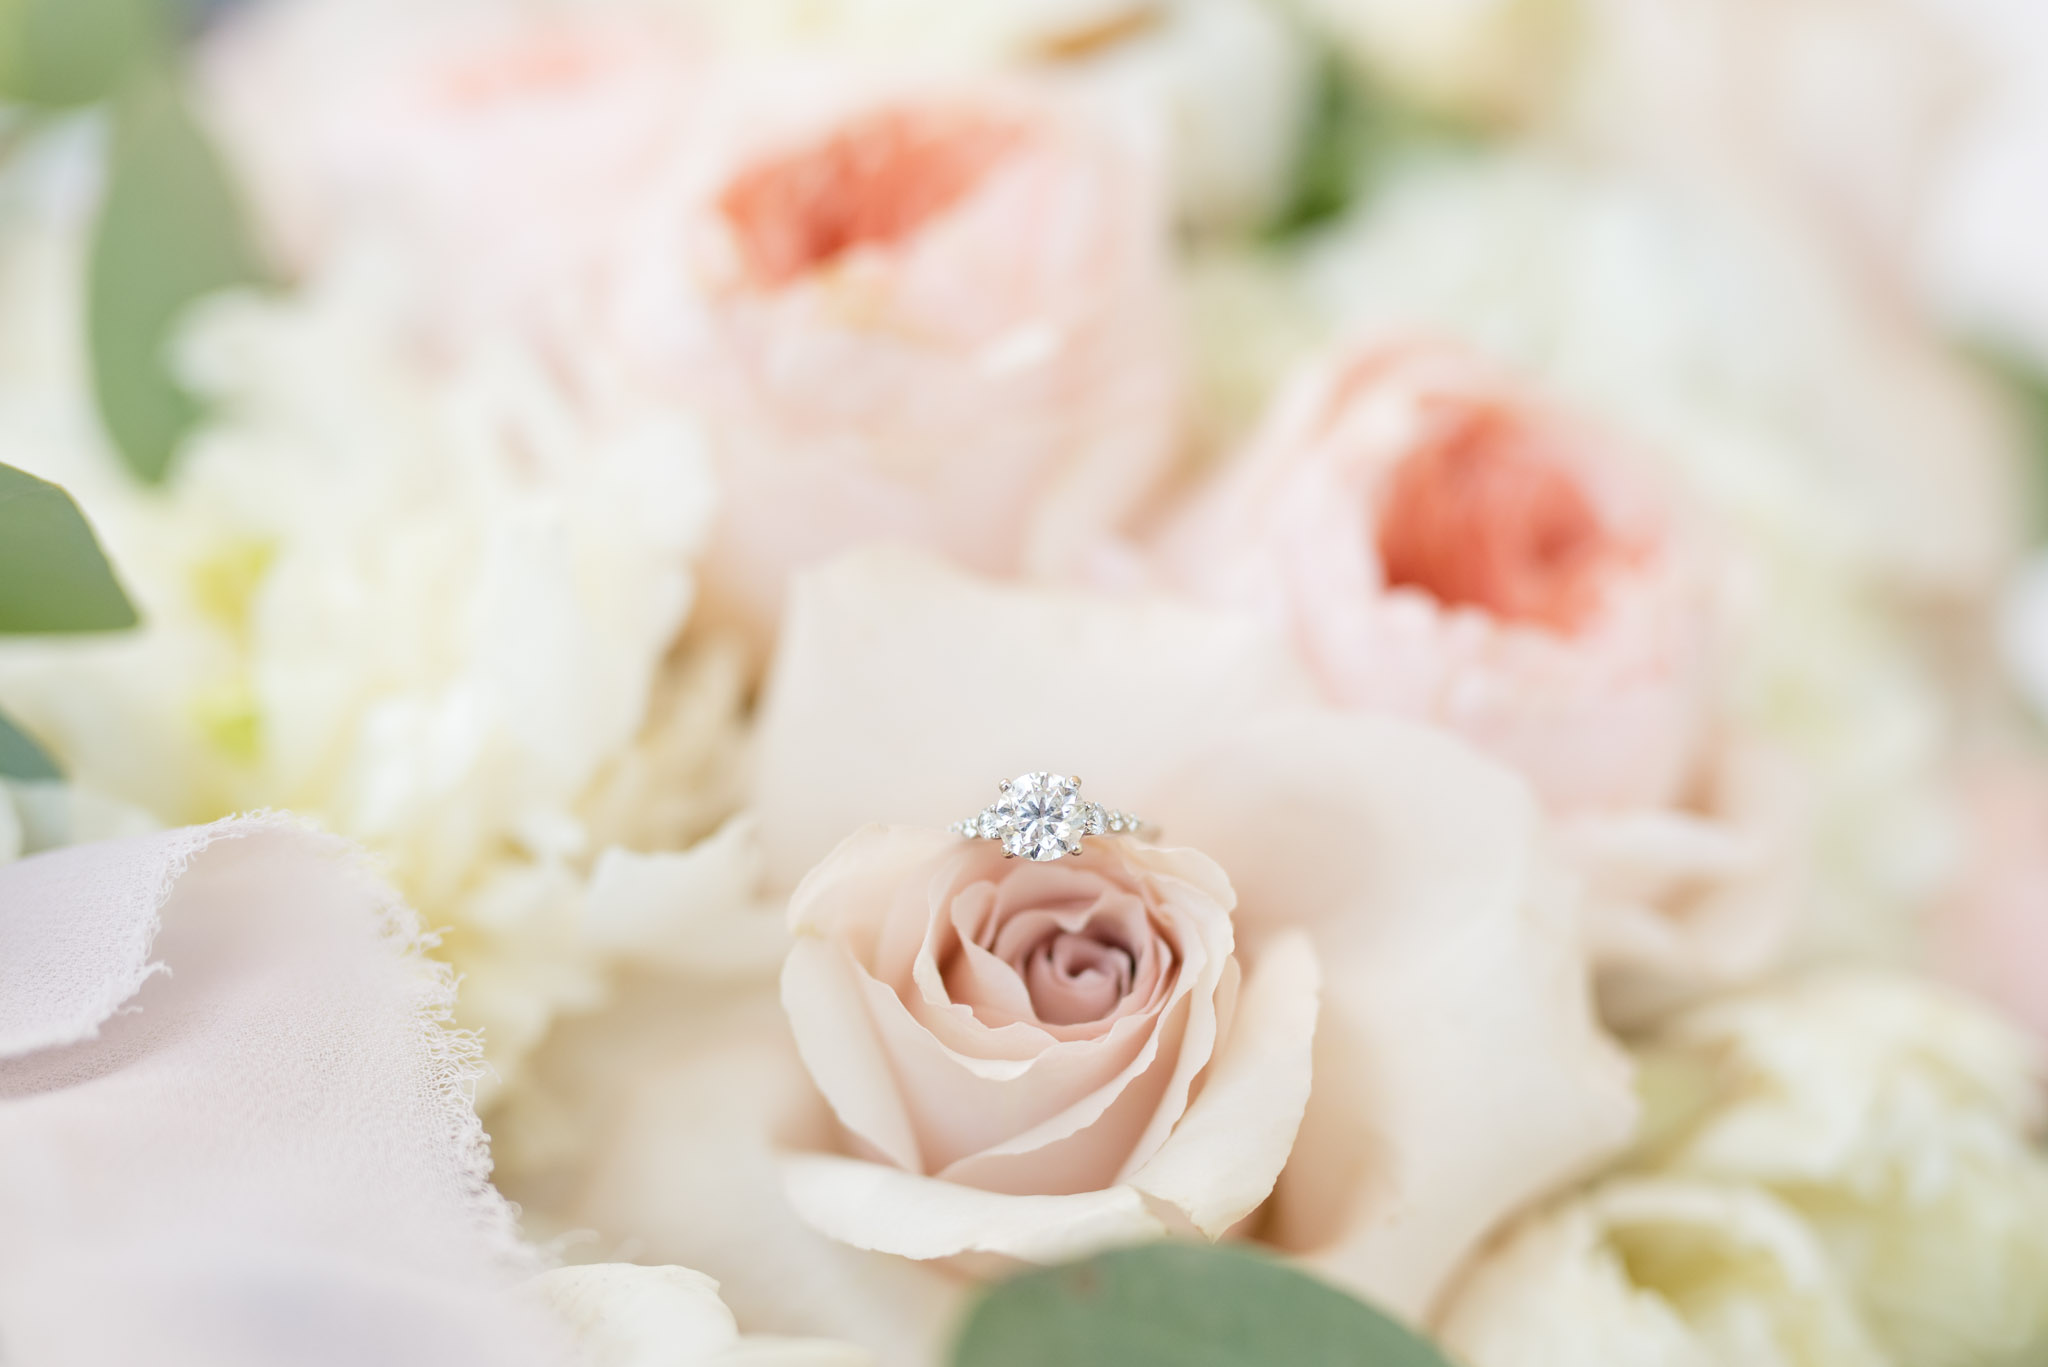 Engagement ring sits on pink flower.